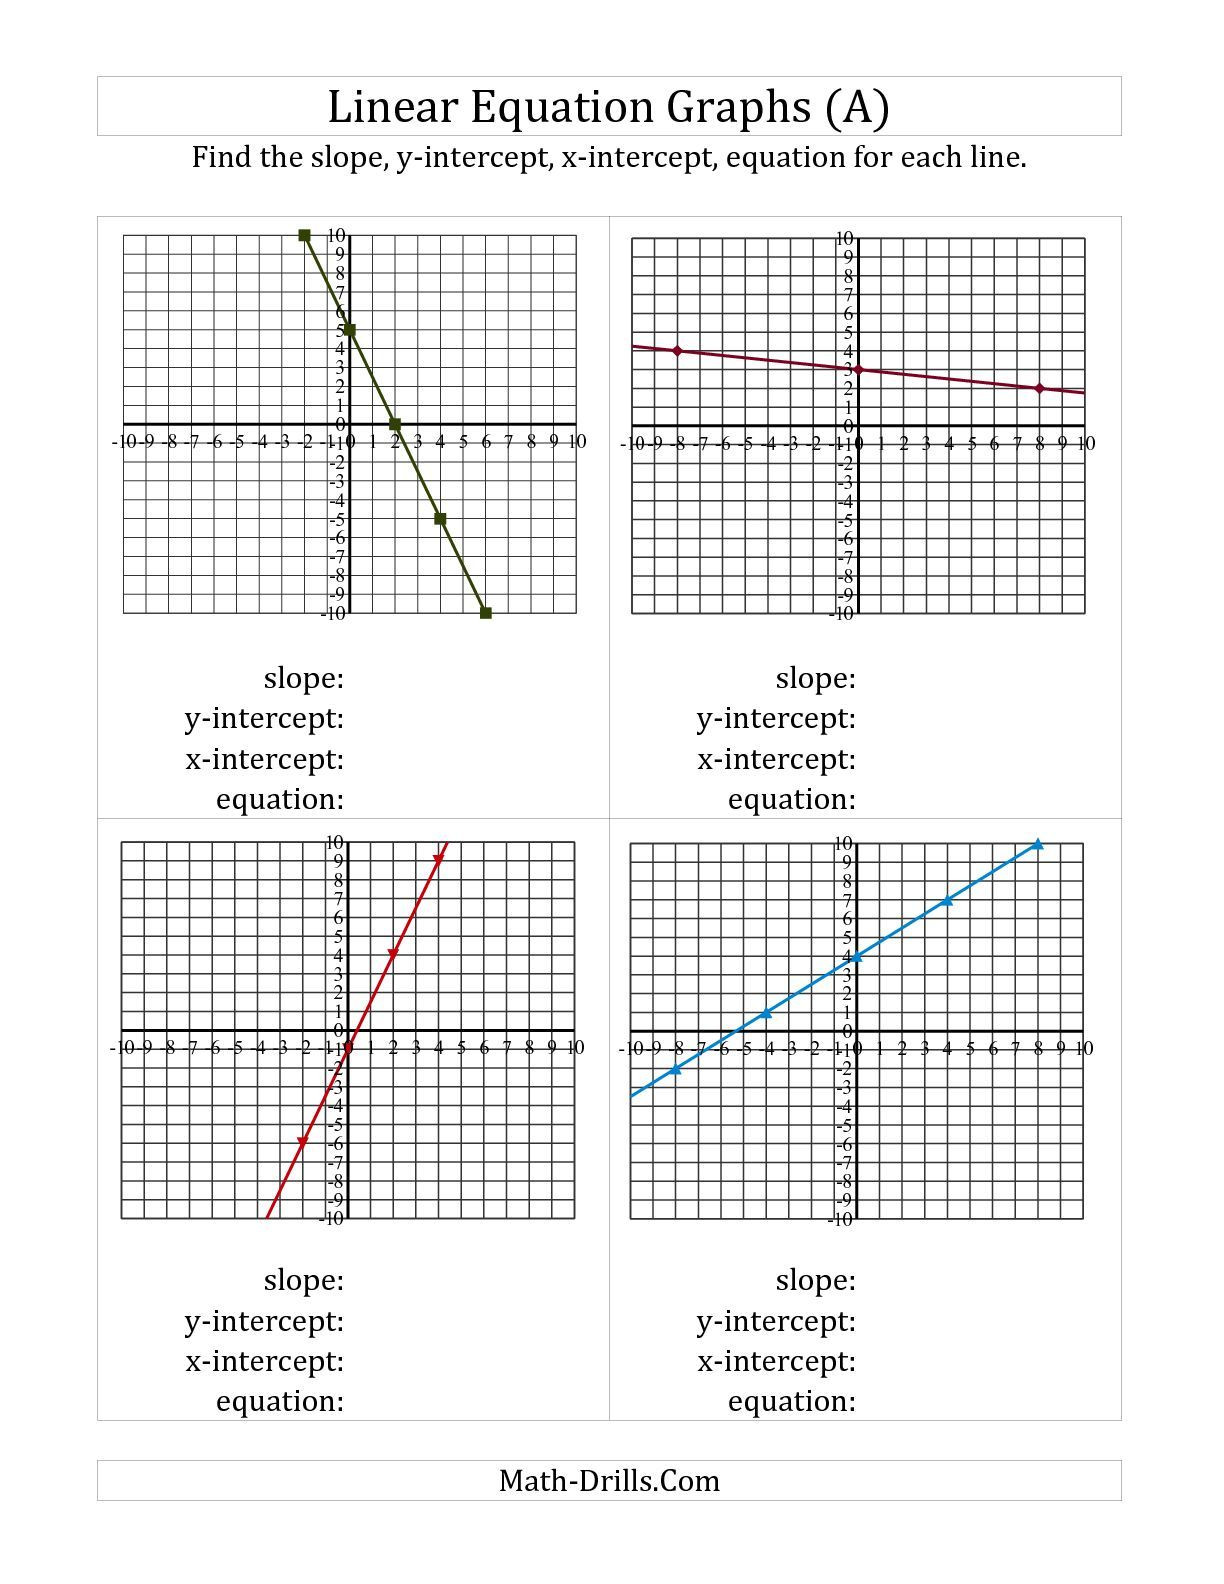 Graphing Linear Functions Worksheet Image Result for Linear Equations Worksheet